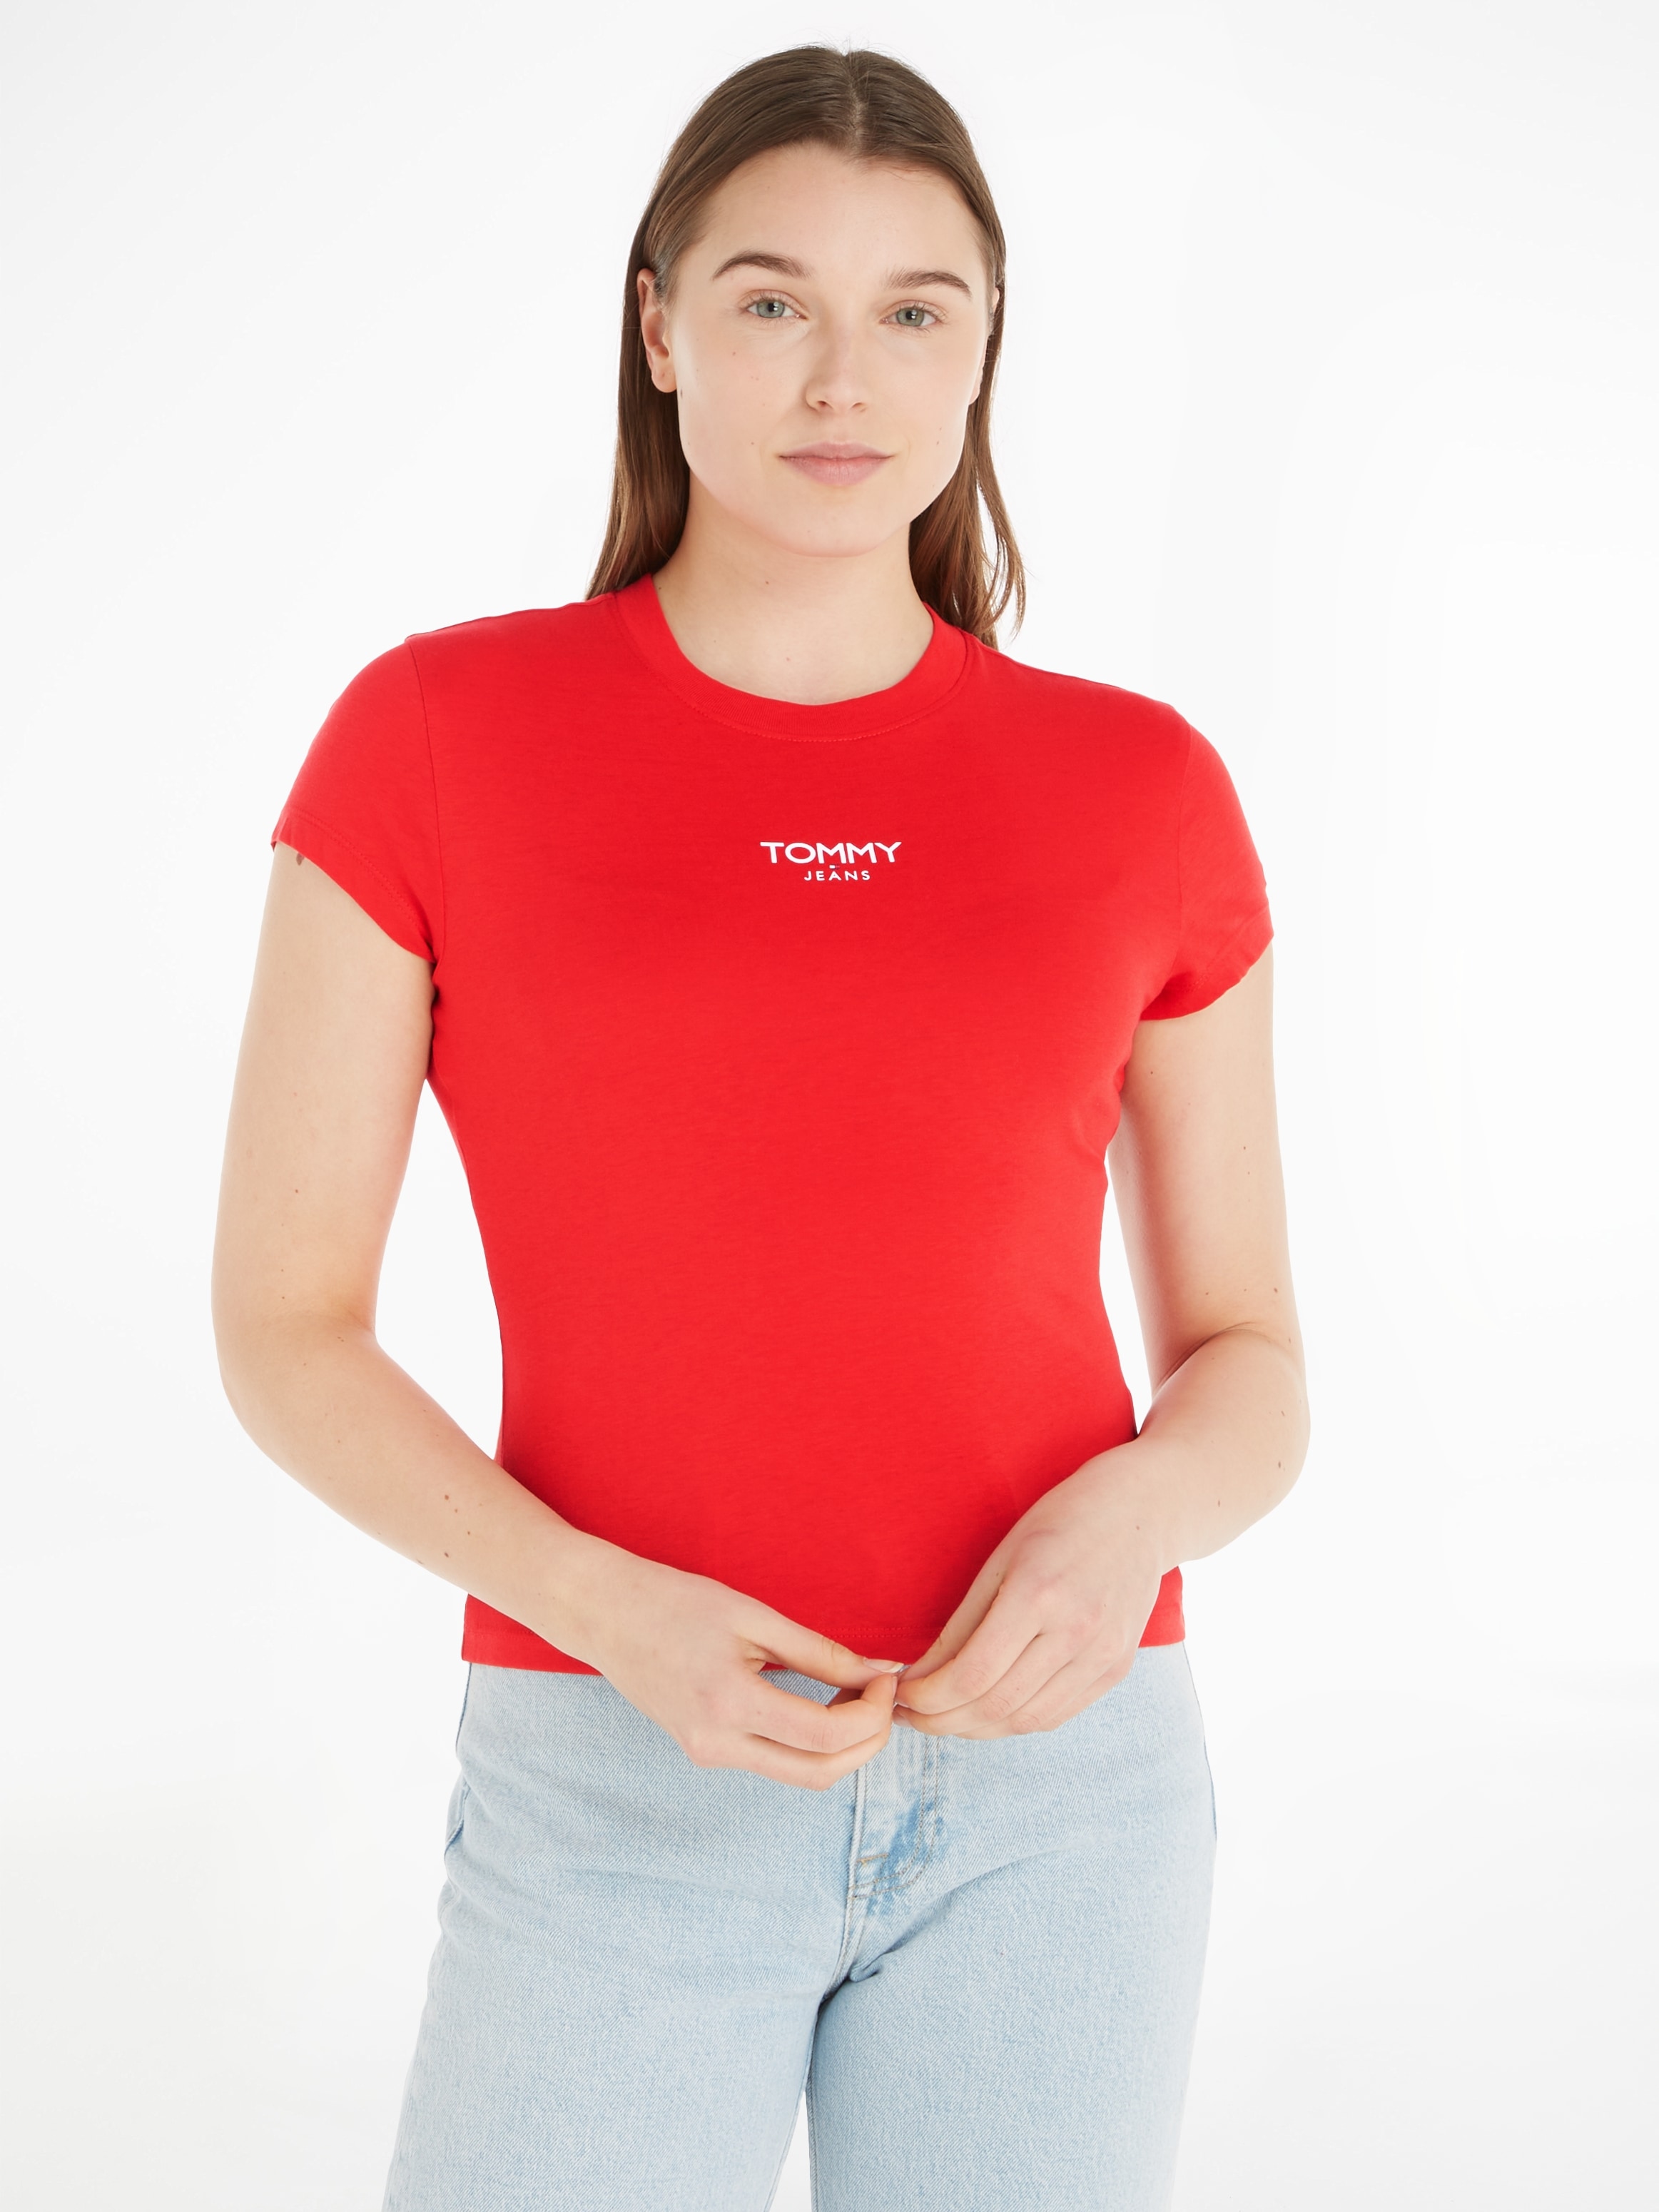 Tommy Jeans T-Shirt »TJW LOGO Jeans Tommy bei SS«, Logo ♕ BBY 1 ESSENTIAL mit